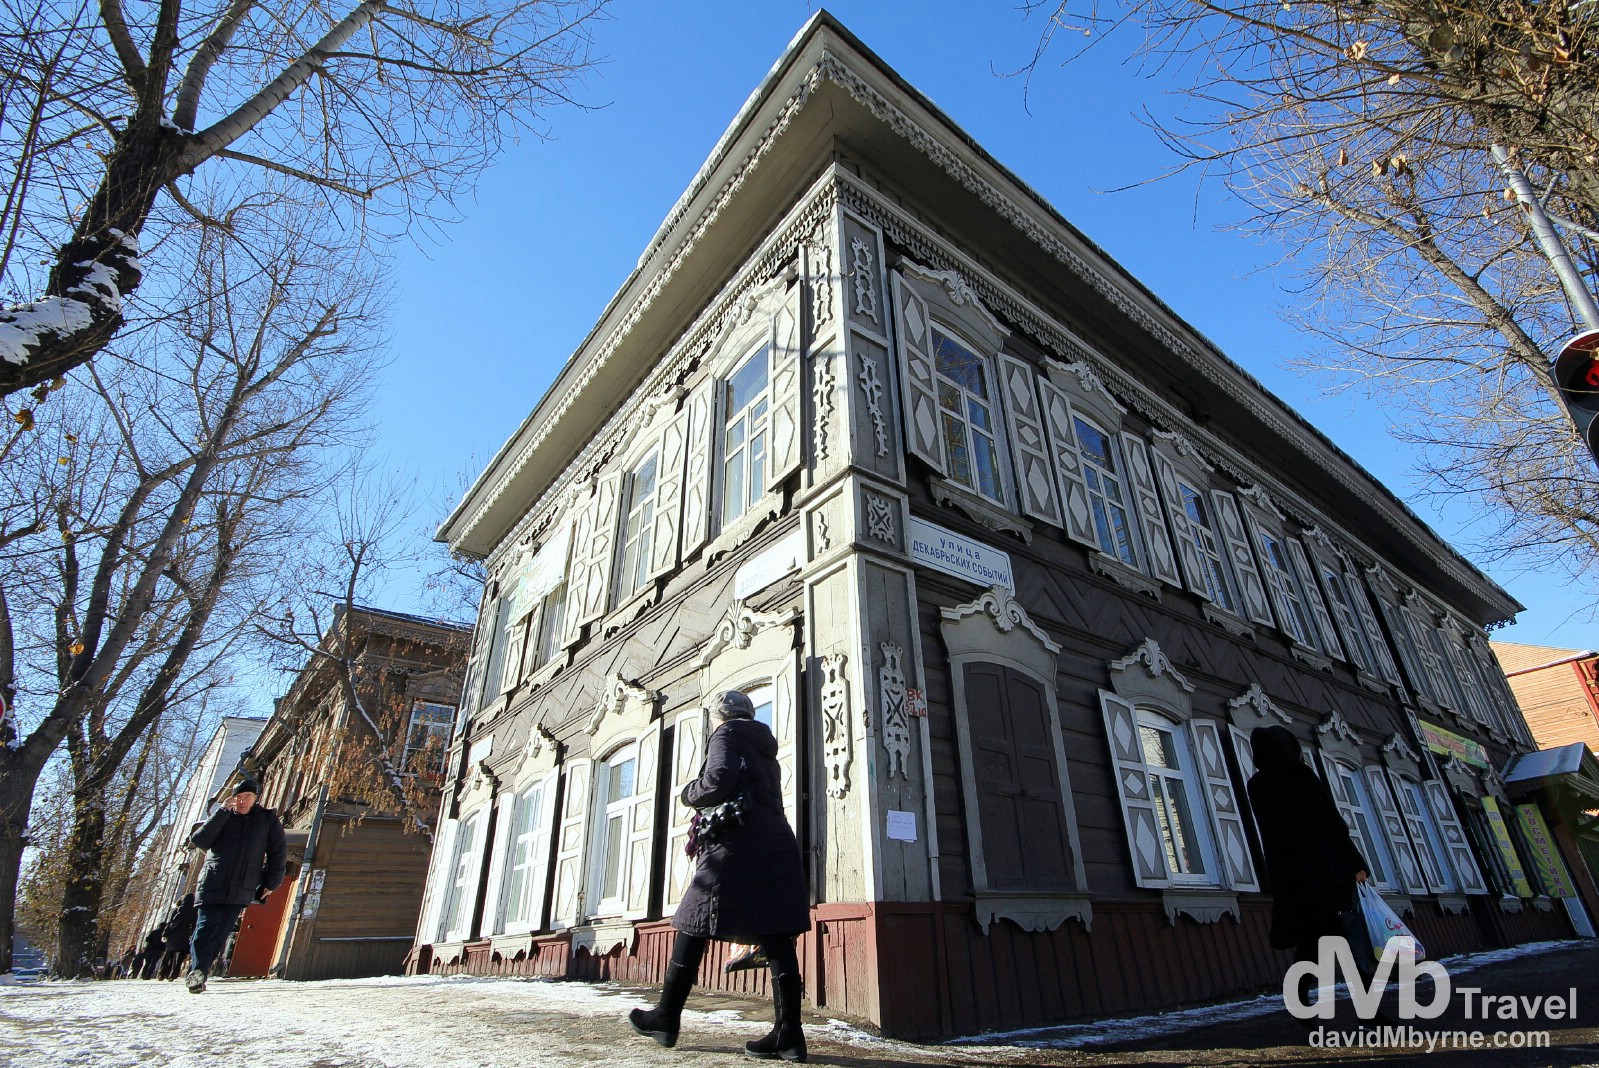 A typical Siberian wooden building on the streets of Irkutsk, Siberian Russia. November 7th 2012.